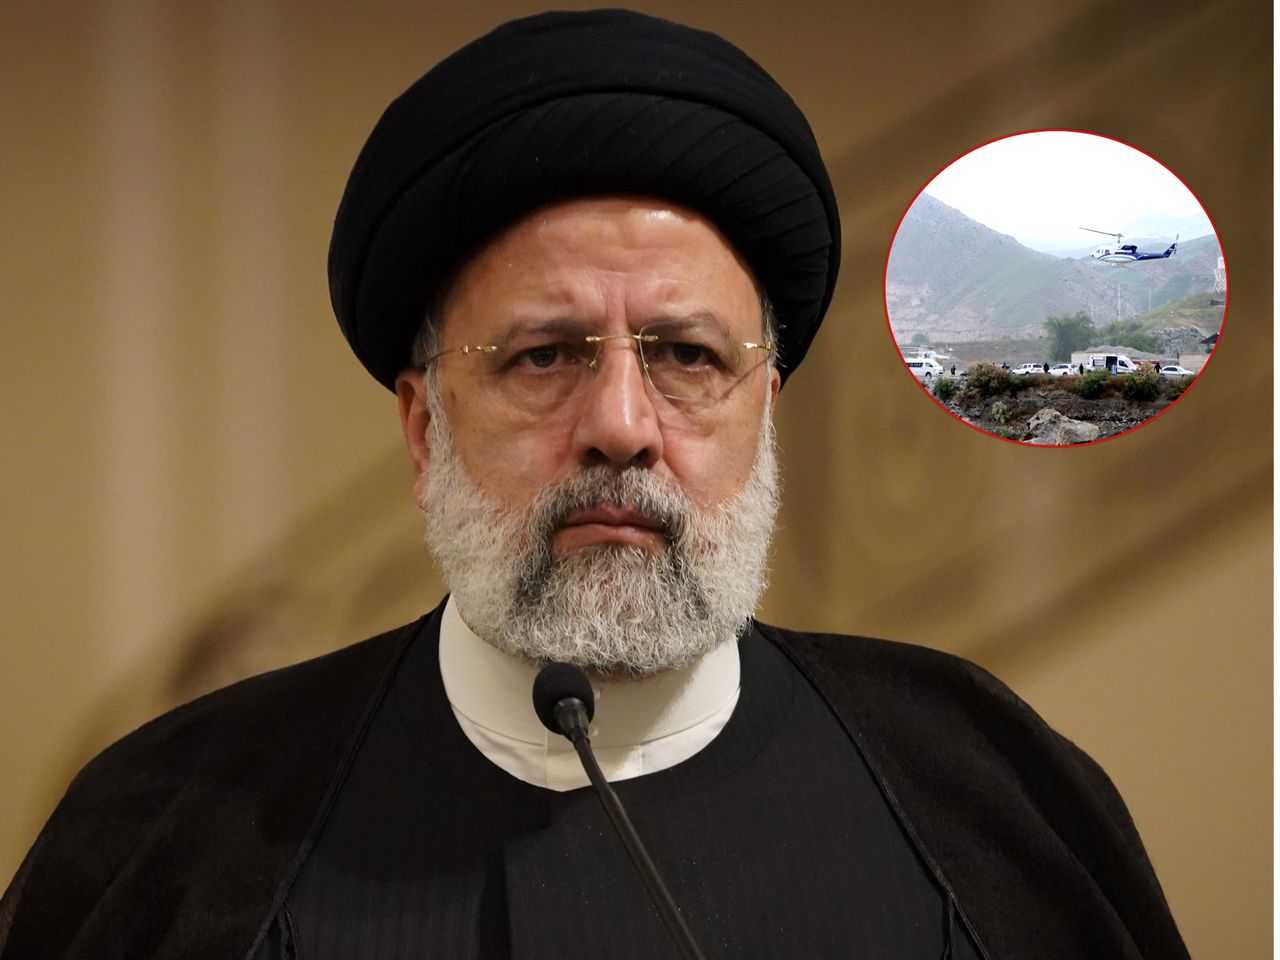 Iranian President Raisi's fatal helicopter crash ruled accidental